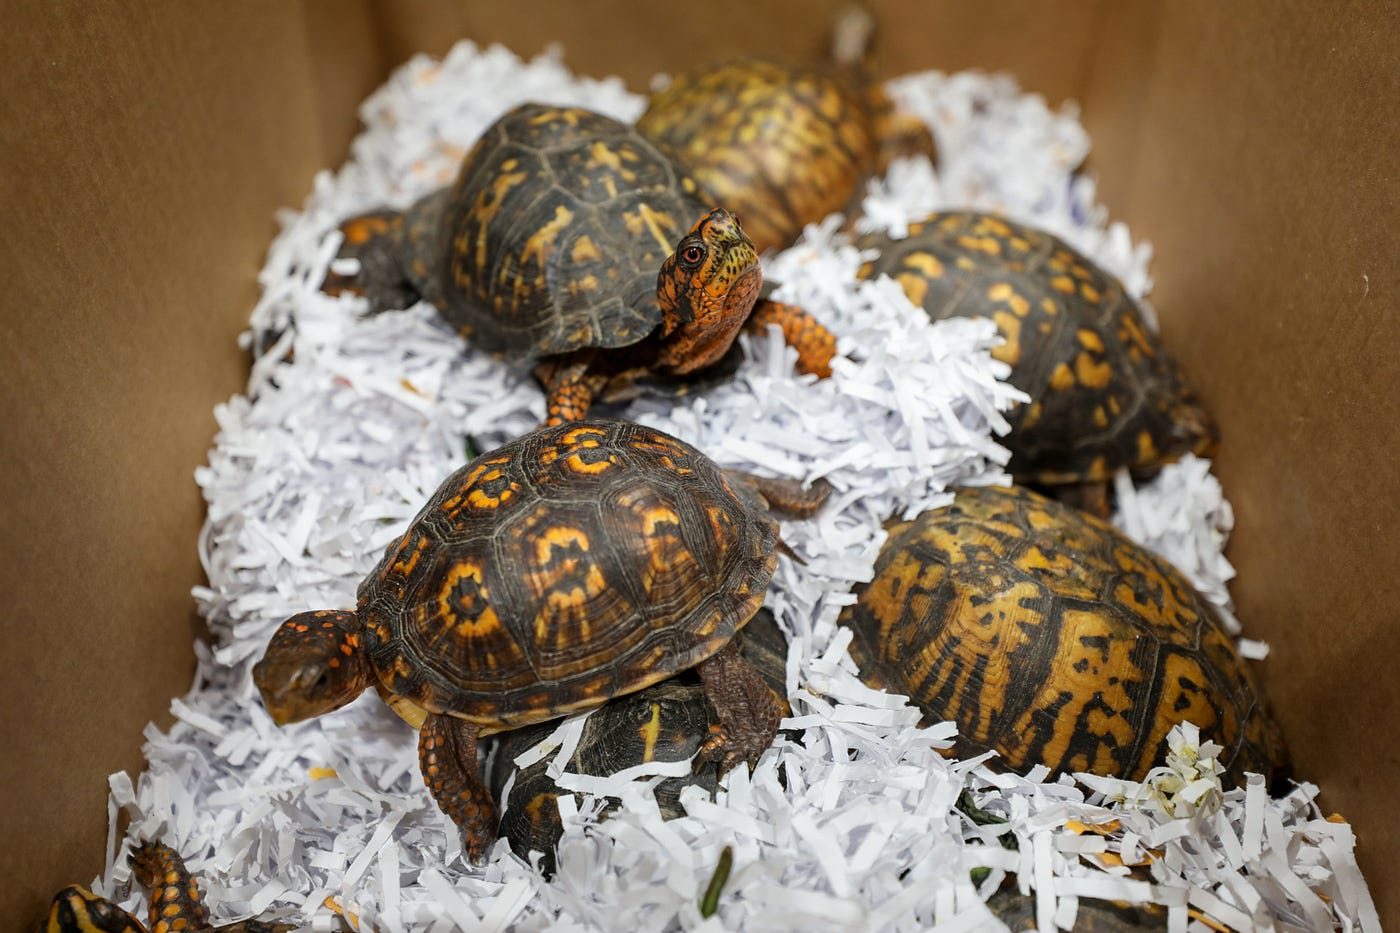 Zoo takes in 10 tiny turtles at conservation lab